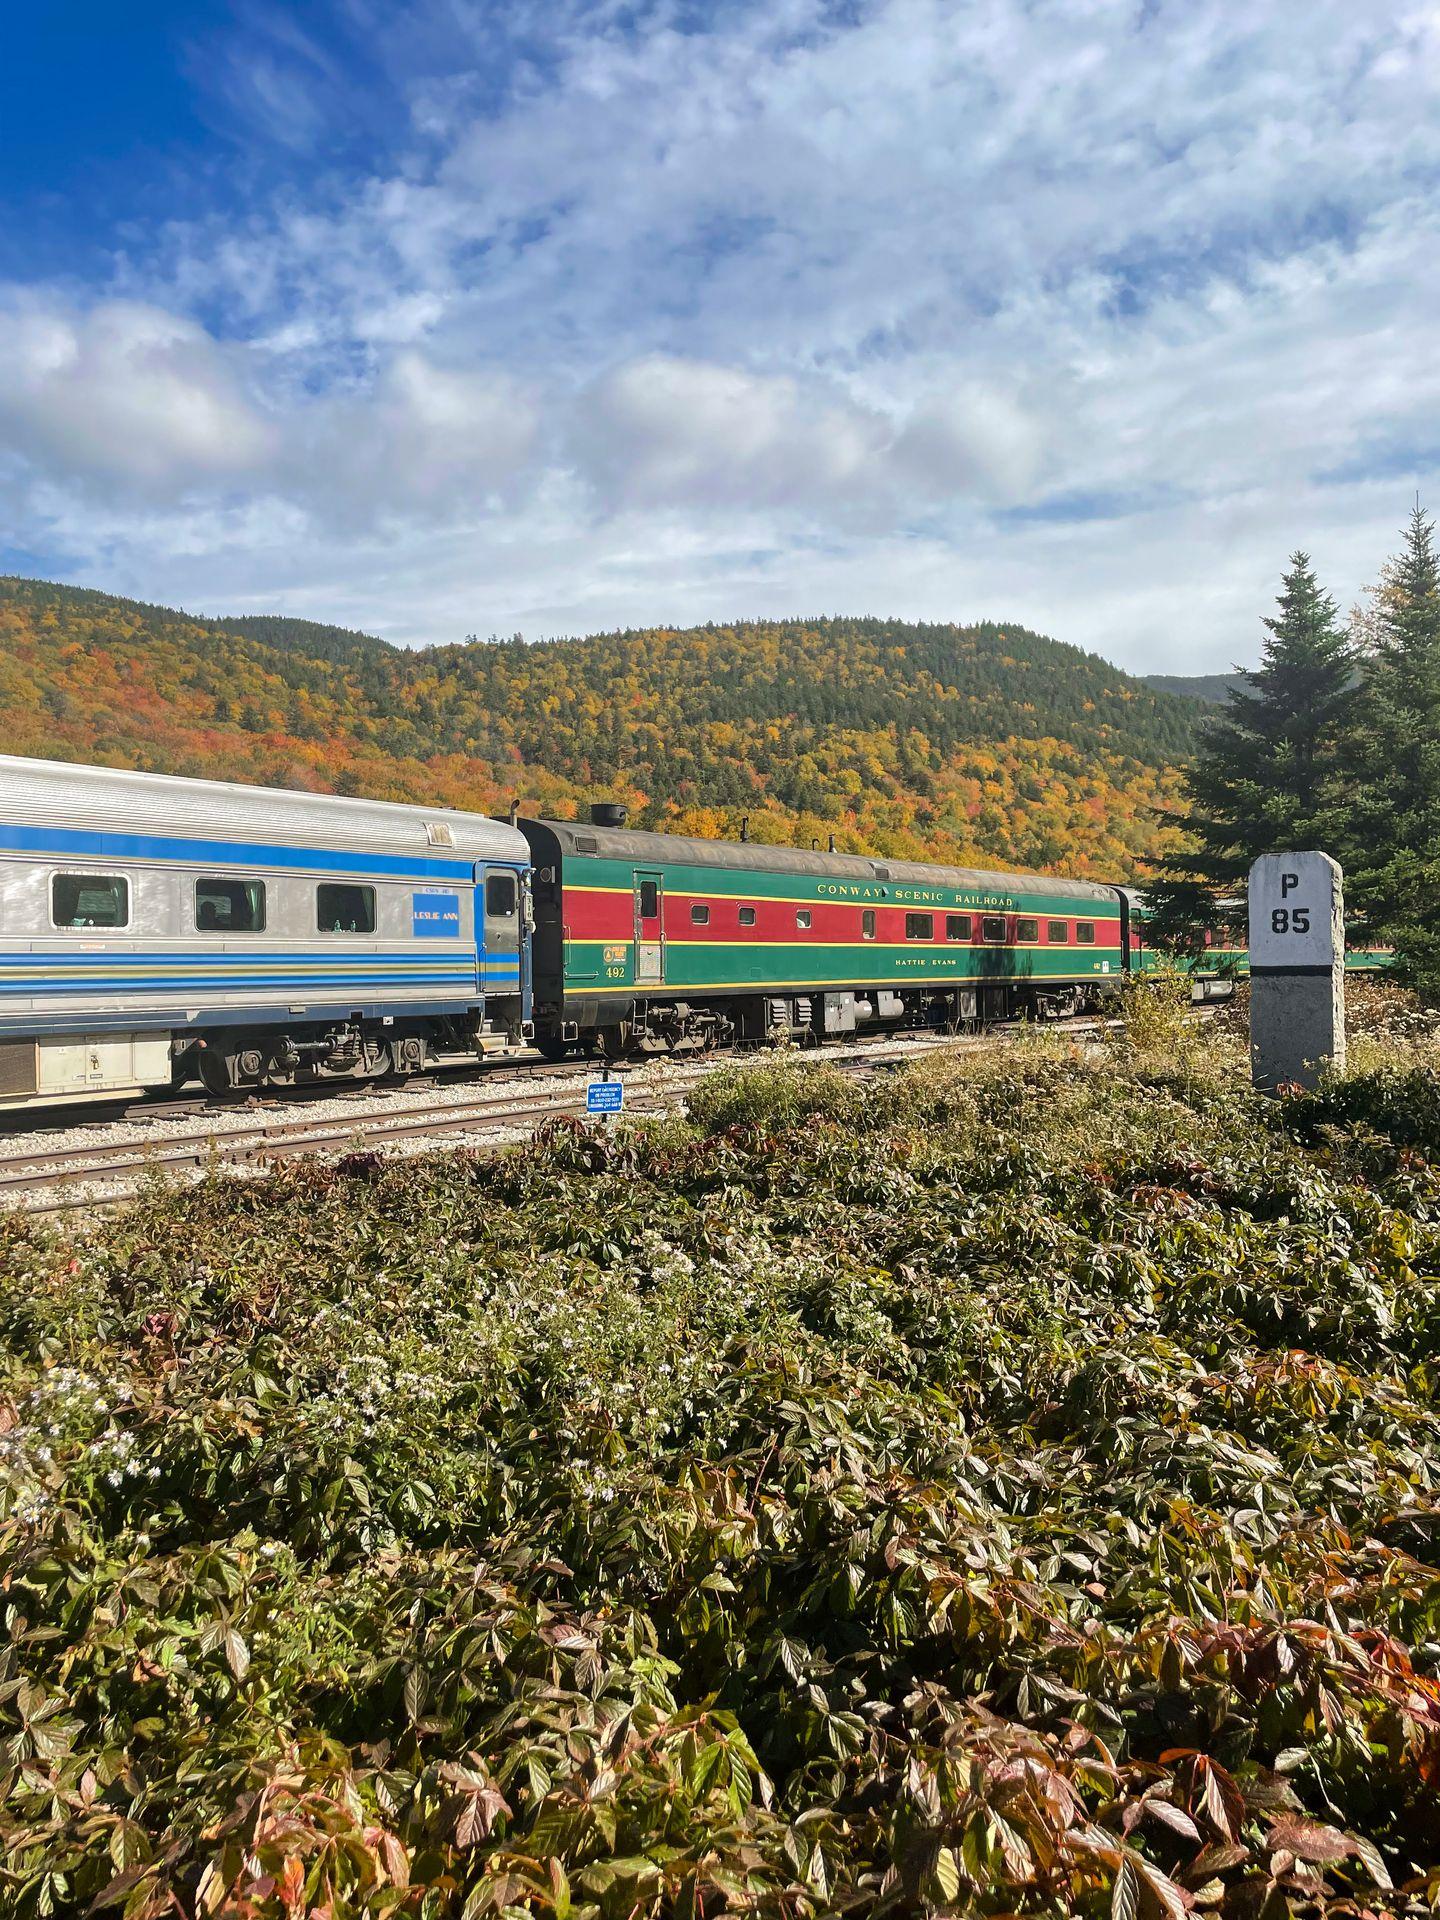 The Conway Scenic Railroad parked in front of a mountain covered in orange trees.